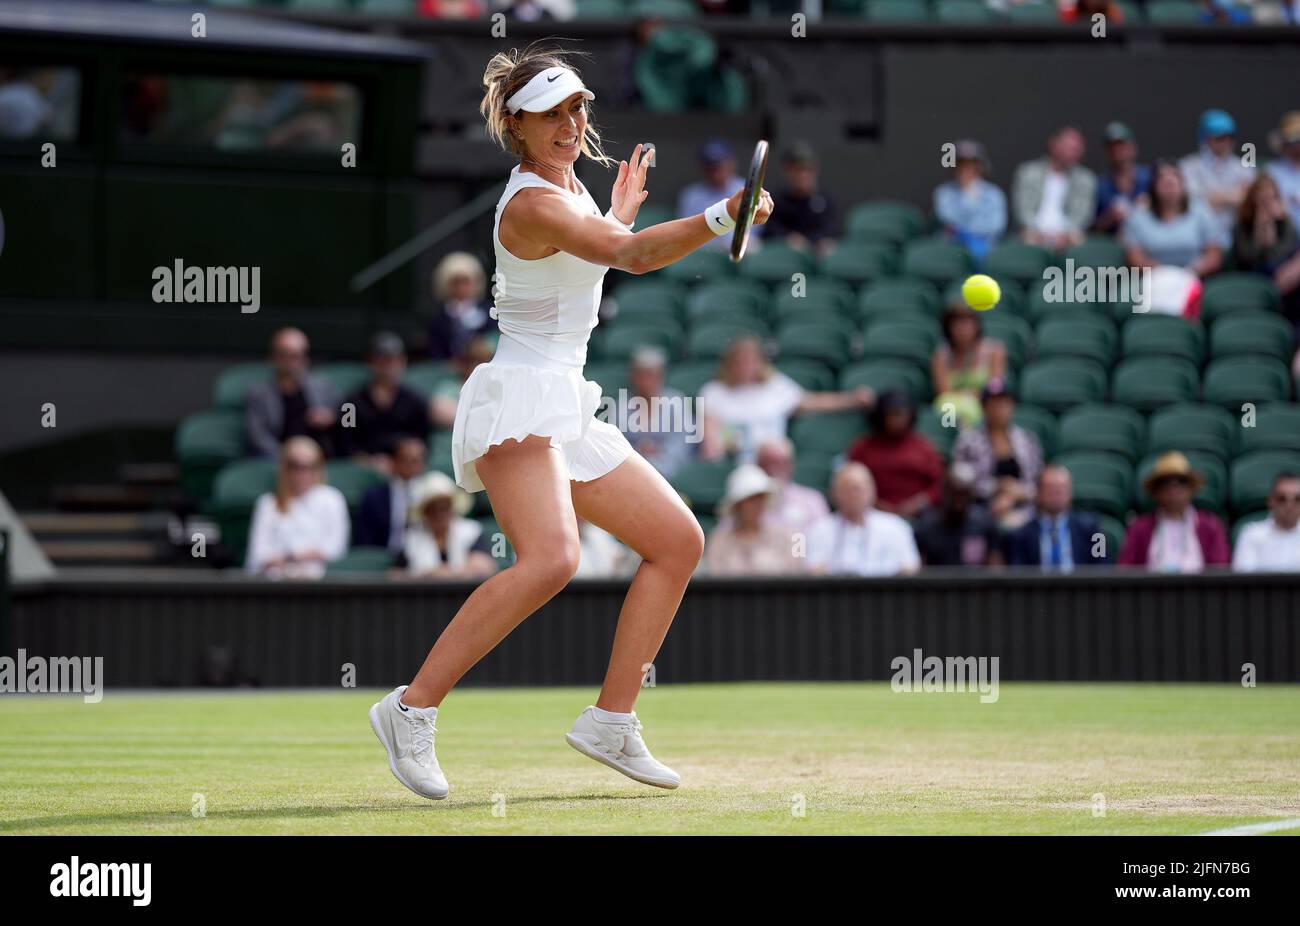 Paula Badosa in action during their Ladies' Singles fourth round match against Simona Halep on day eight of the 2022 Wimbledon Championships at the All England Lawn Tennis and Croquet Club, Wimbledon. Picture date: Monday July 4, 2022. Stock Photo